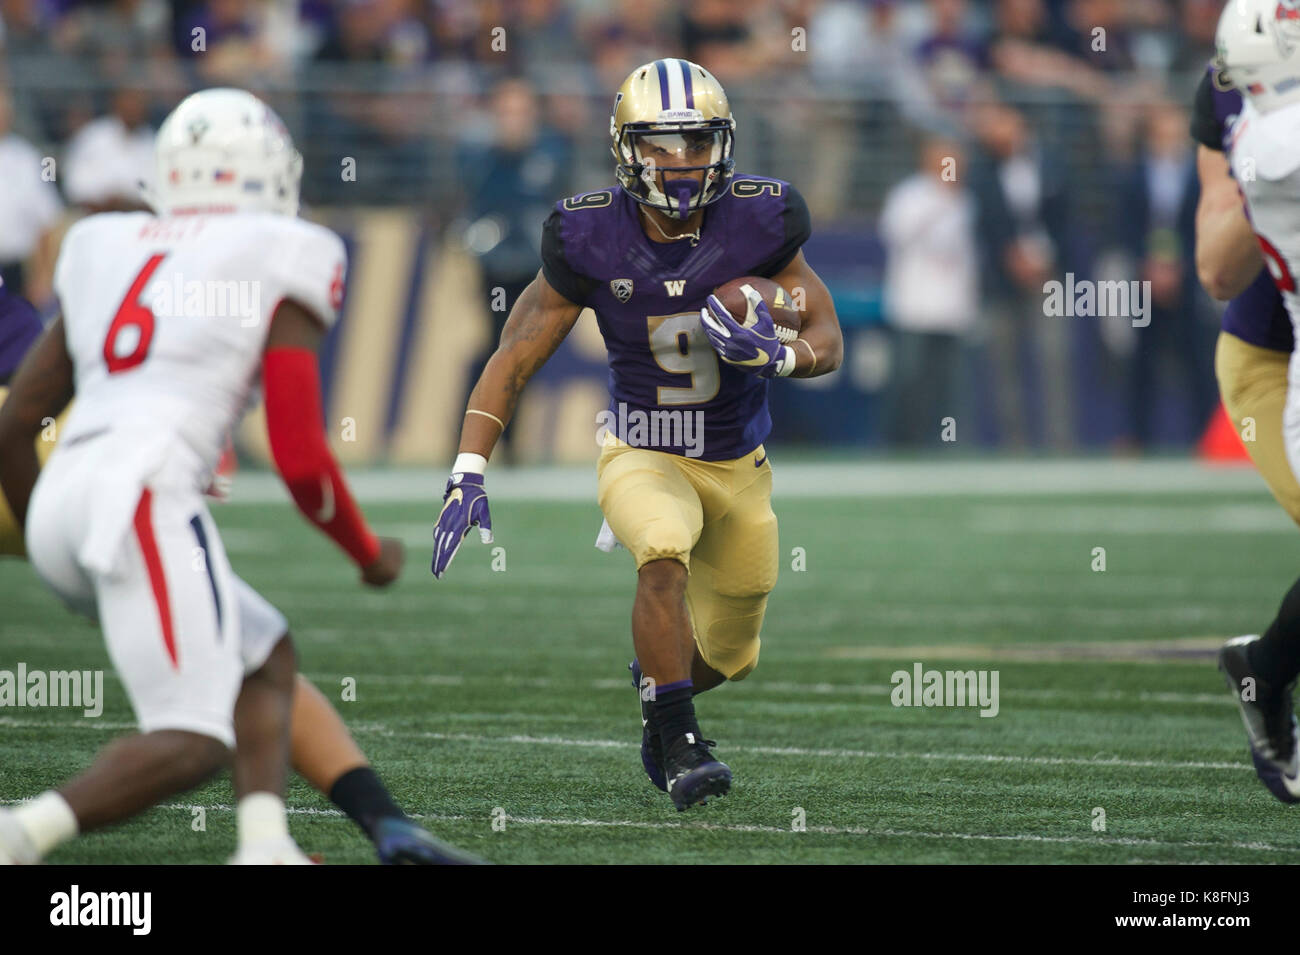 Seattle, WA, USA. 16th Sep, 2017. UW tailback Myles Gaskin (9) in action during a NCAA football game between the Fresno State Bulldogs and the Washington Huskies. The game was played at Husky Stadium in Seattle, WA. Jeff Halstead/CSM/Alamy Live News Stock Photo